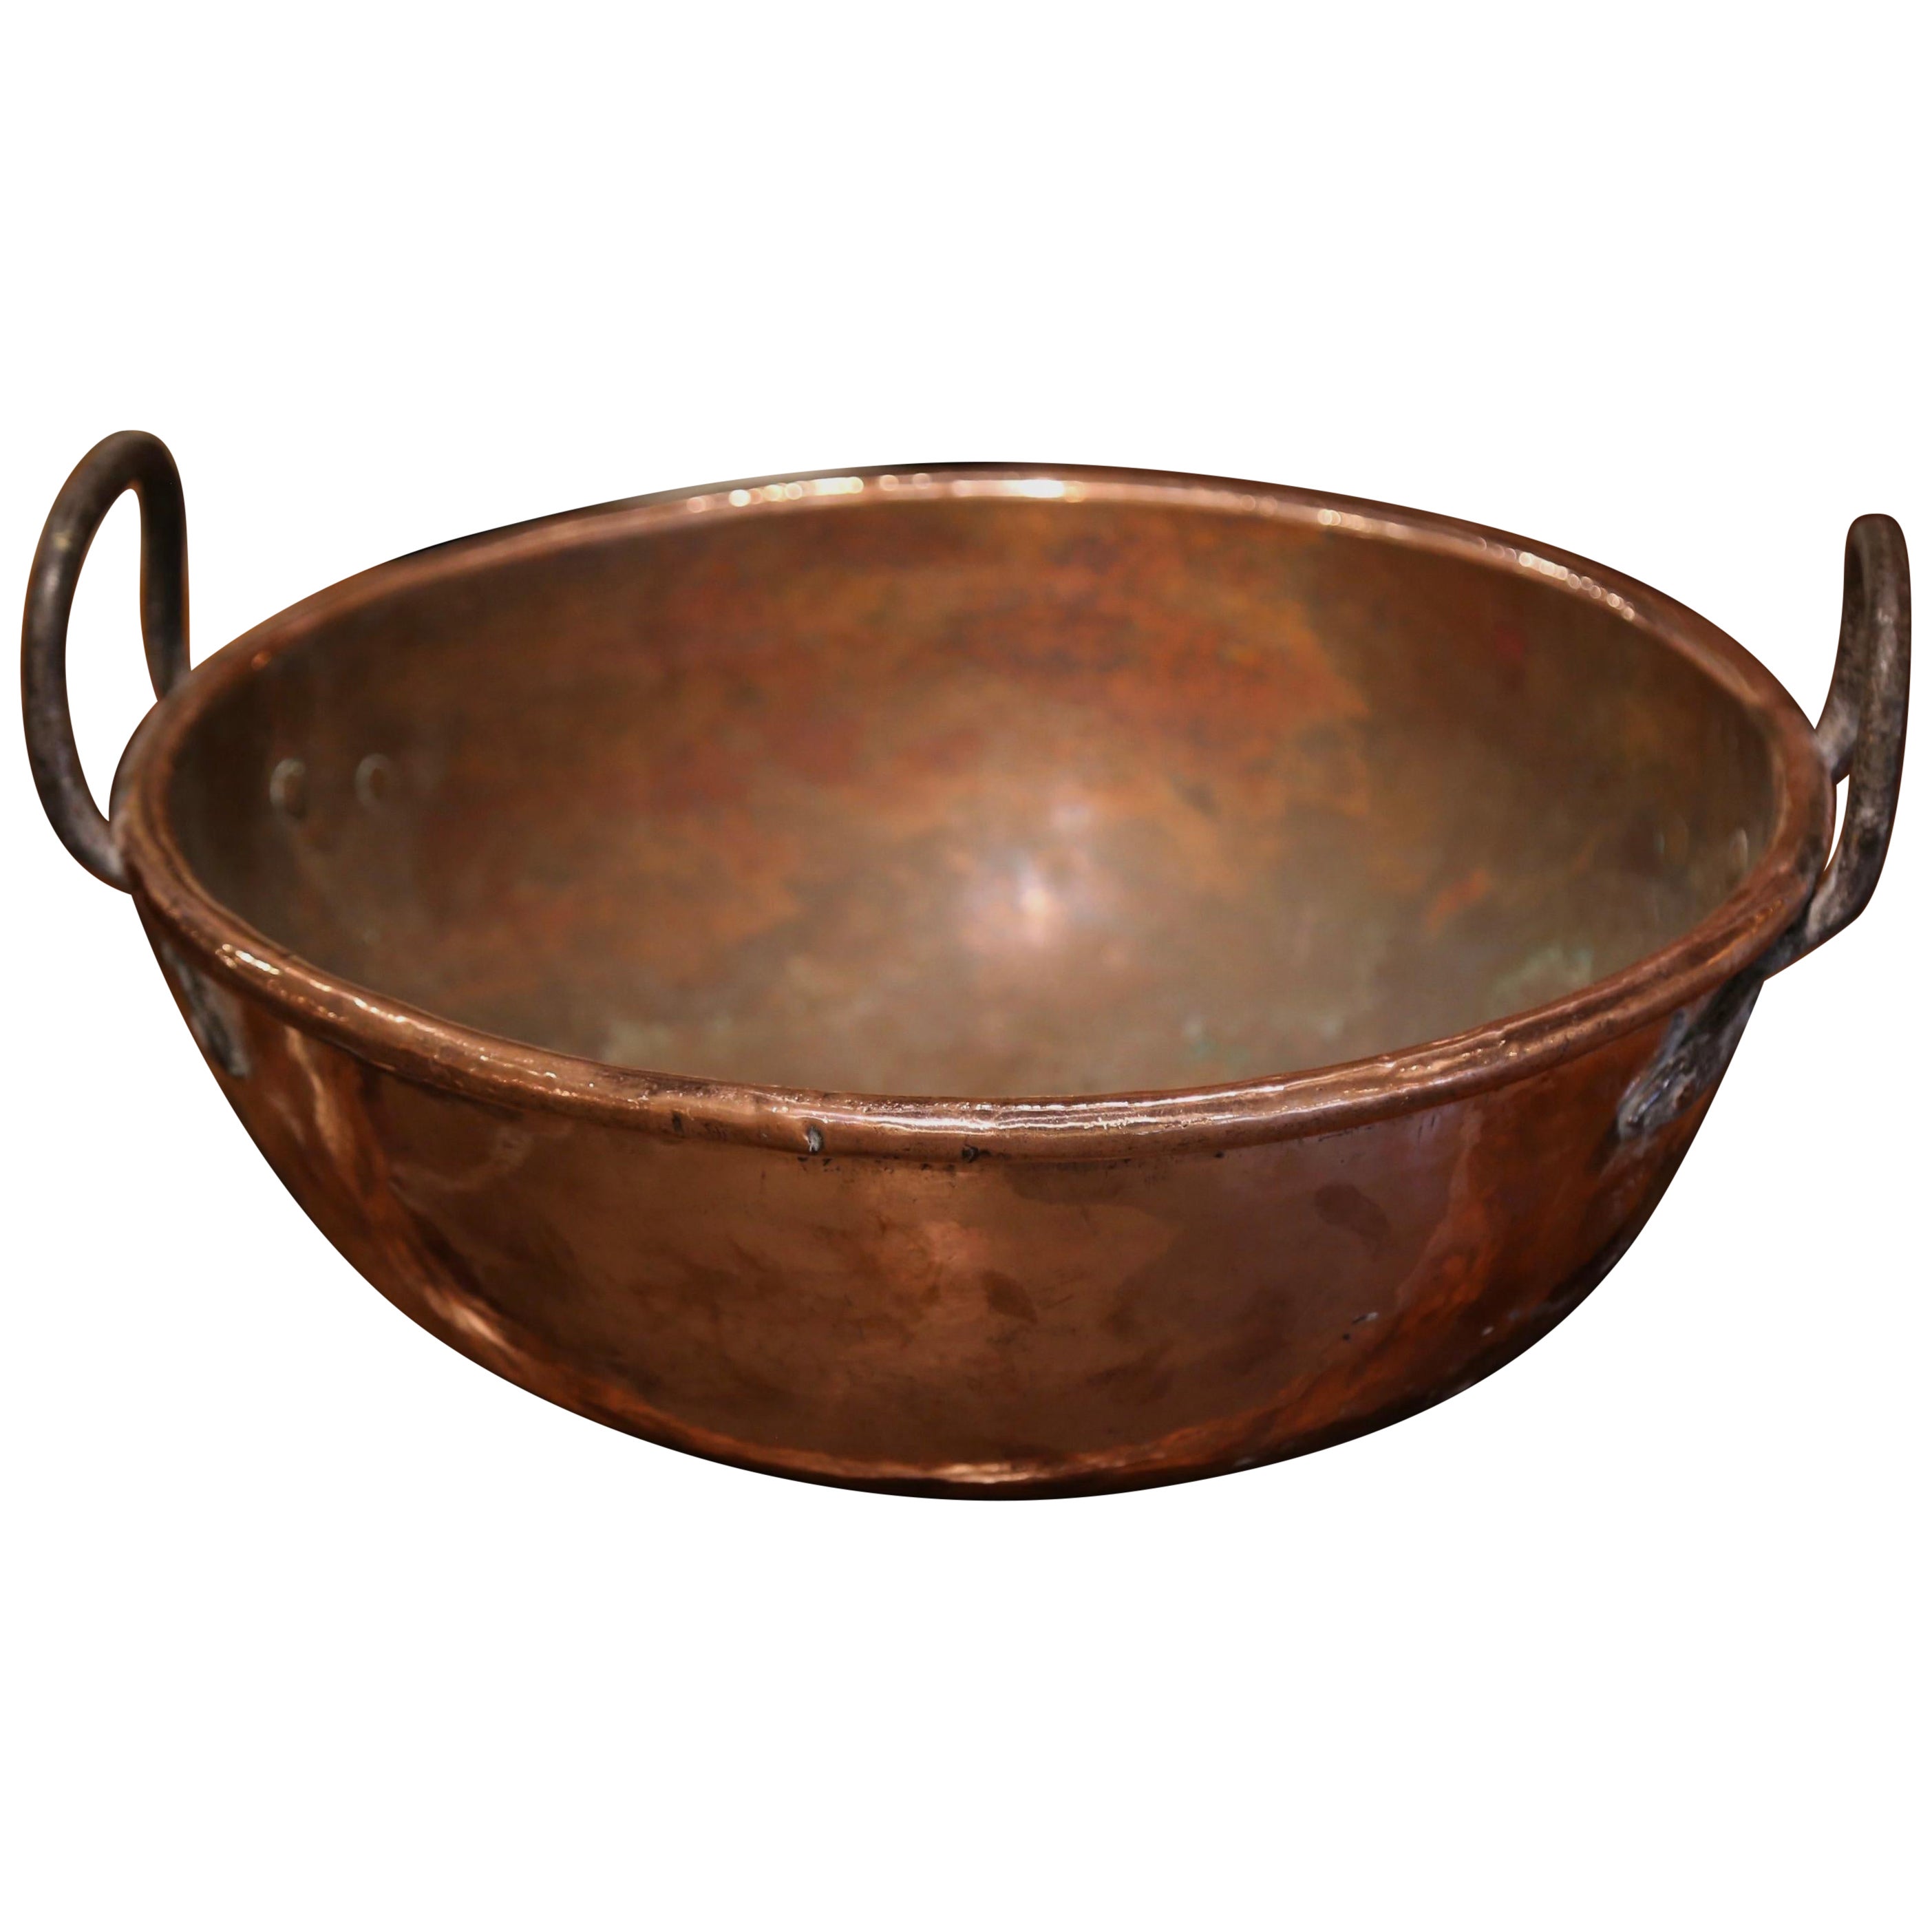 18th Century French Copper Jelly and Jam Boiling Bowl with Iron Handles